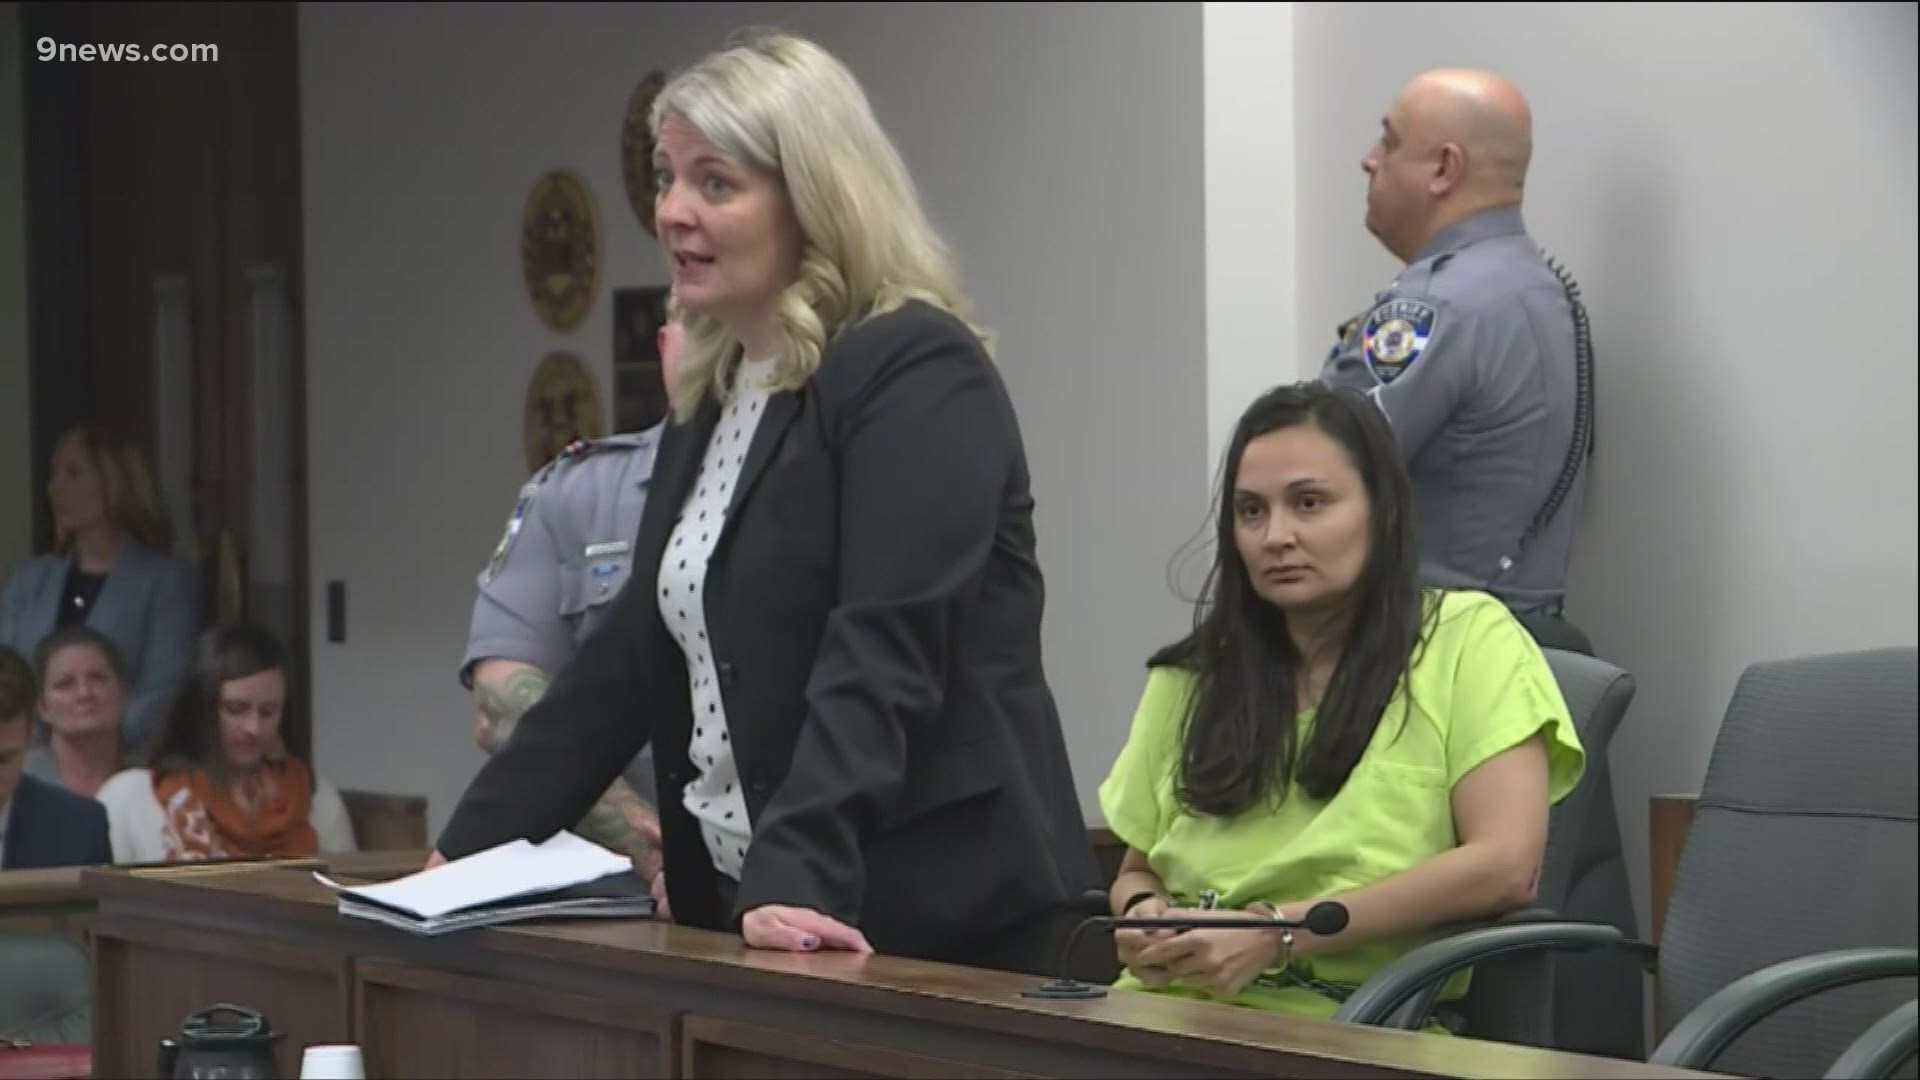 Letecia Stauch is accused of killing her 11-year-old stepson and now, plotting to escape from jail.